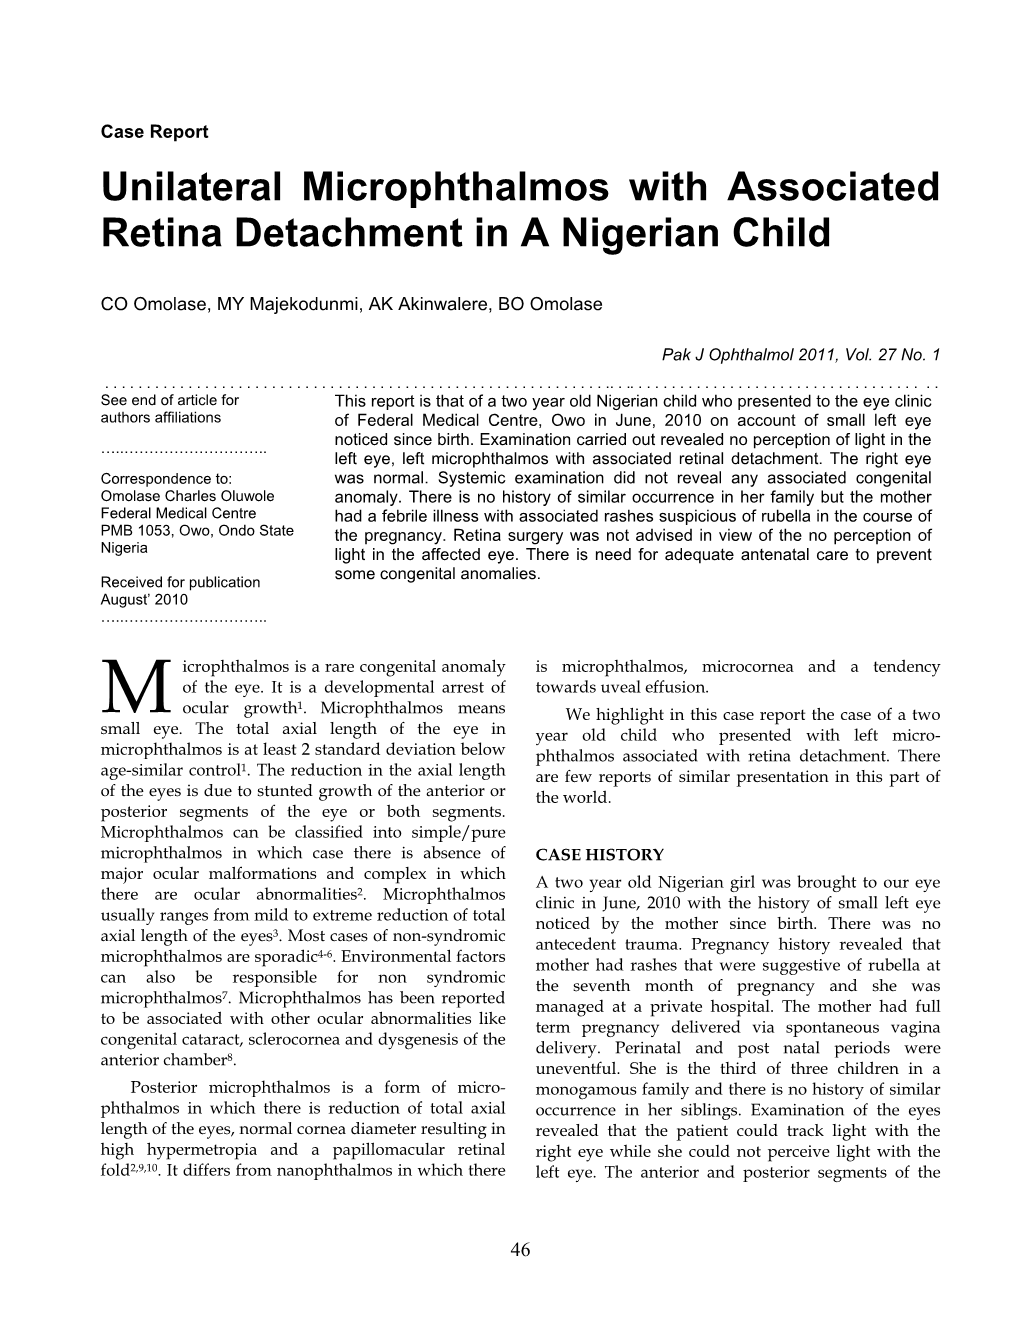 Case Report Unilateral Microphthalmos with Associated